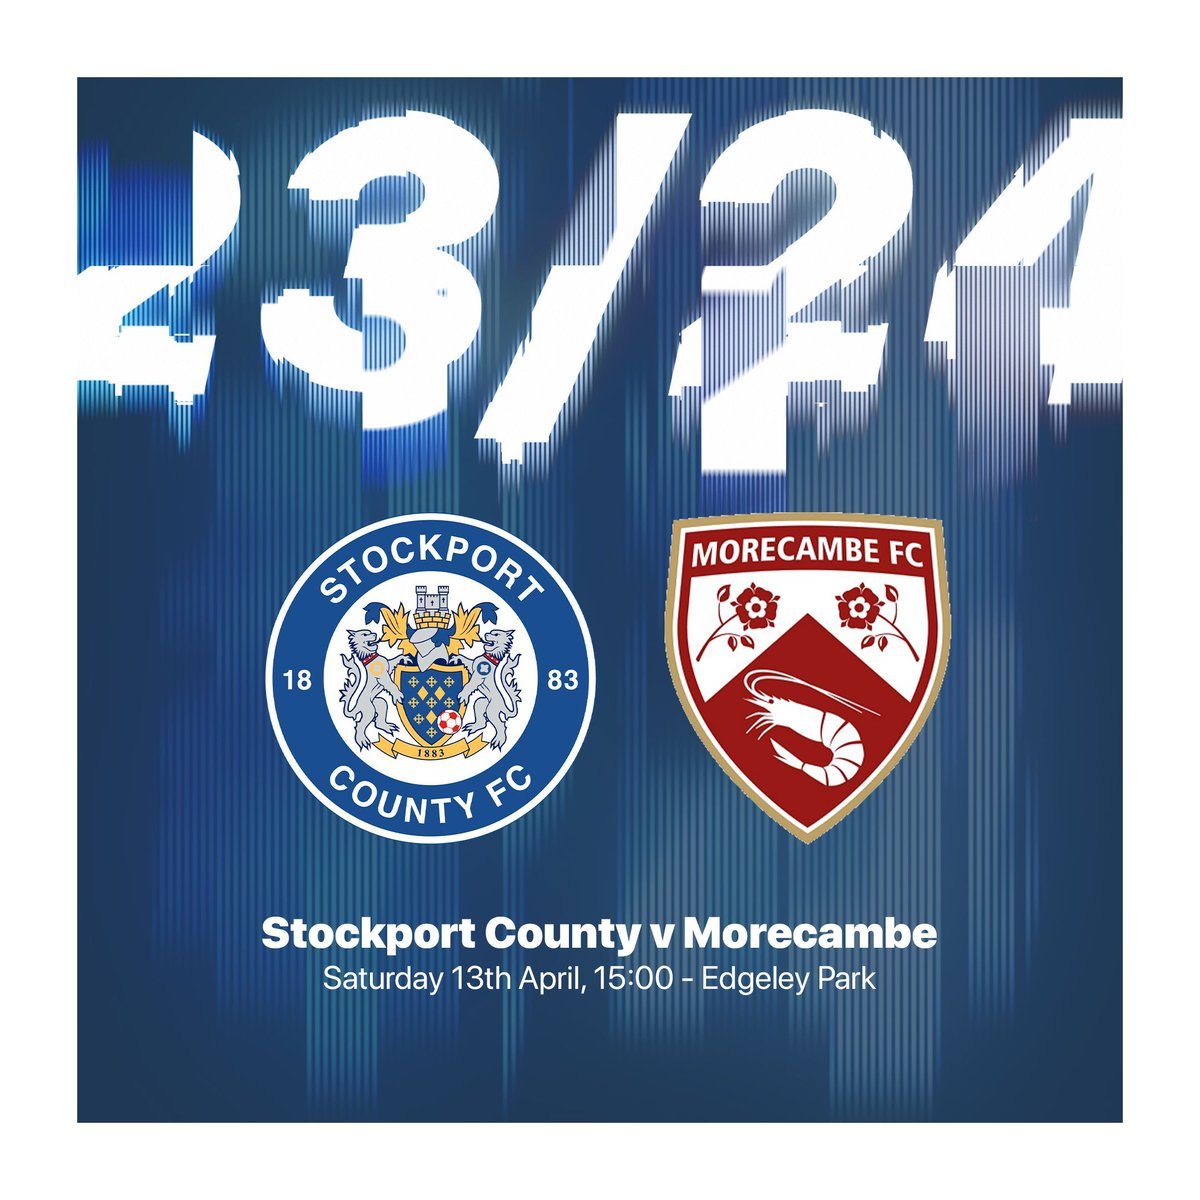 🎟️ A very limited number of tickets for Saturday's game against Morecambe are set to be made available. This allocation of tickets will be available to purchase online from 10am tomorrow on a first come, first served basis. #StockportCounty